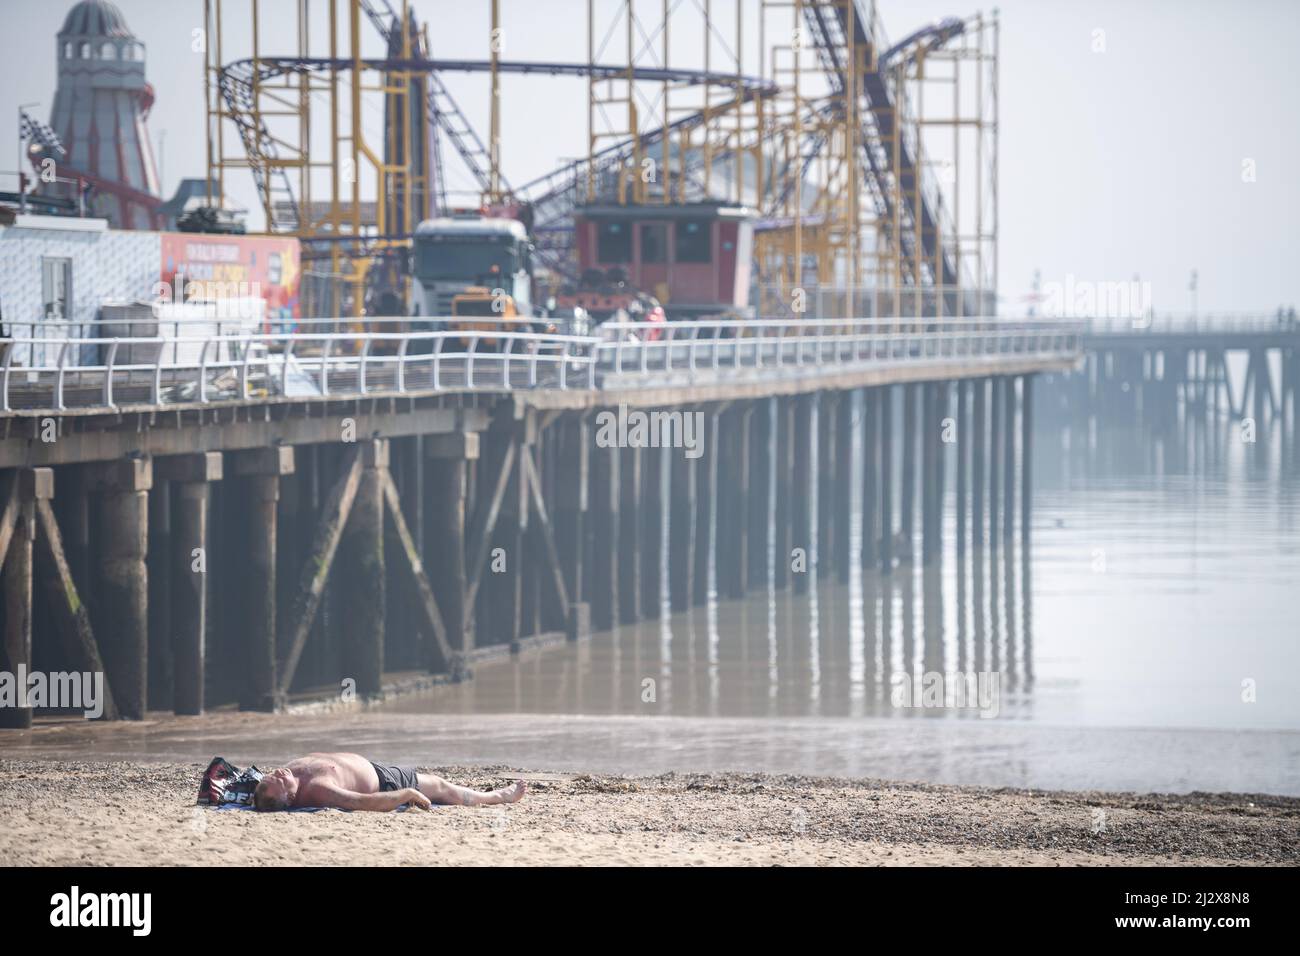 Clacton-on-Sea, Essex, UK. 24th March 2022. Sun worshippers take to the beach at Clacton-on-Sea on what could be one of the warmest days of the year s Stock Photo